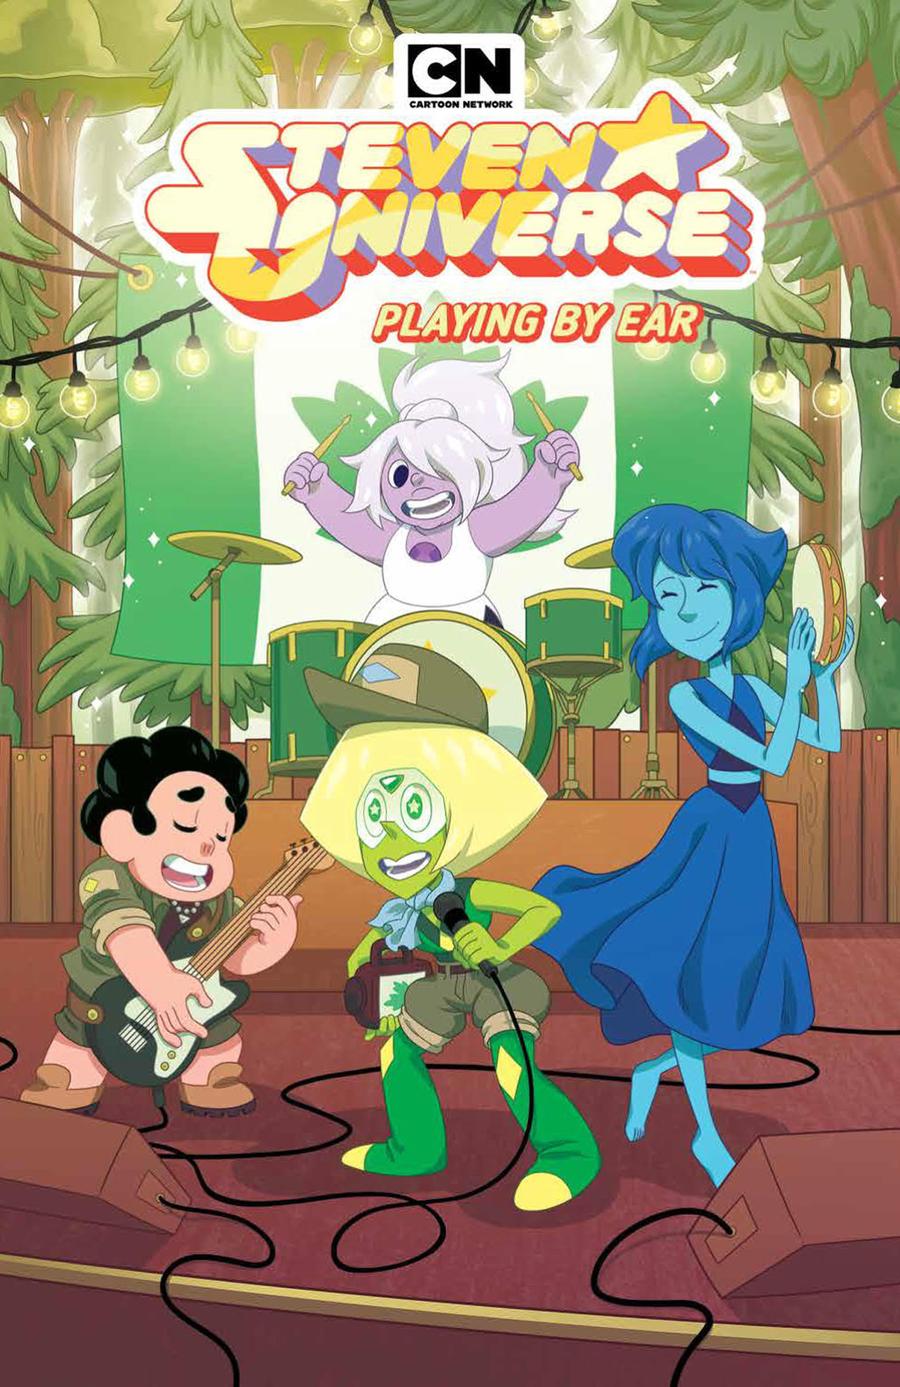 Steven Universe Ongoing Vol 6 Playing By Ear TP